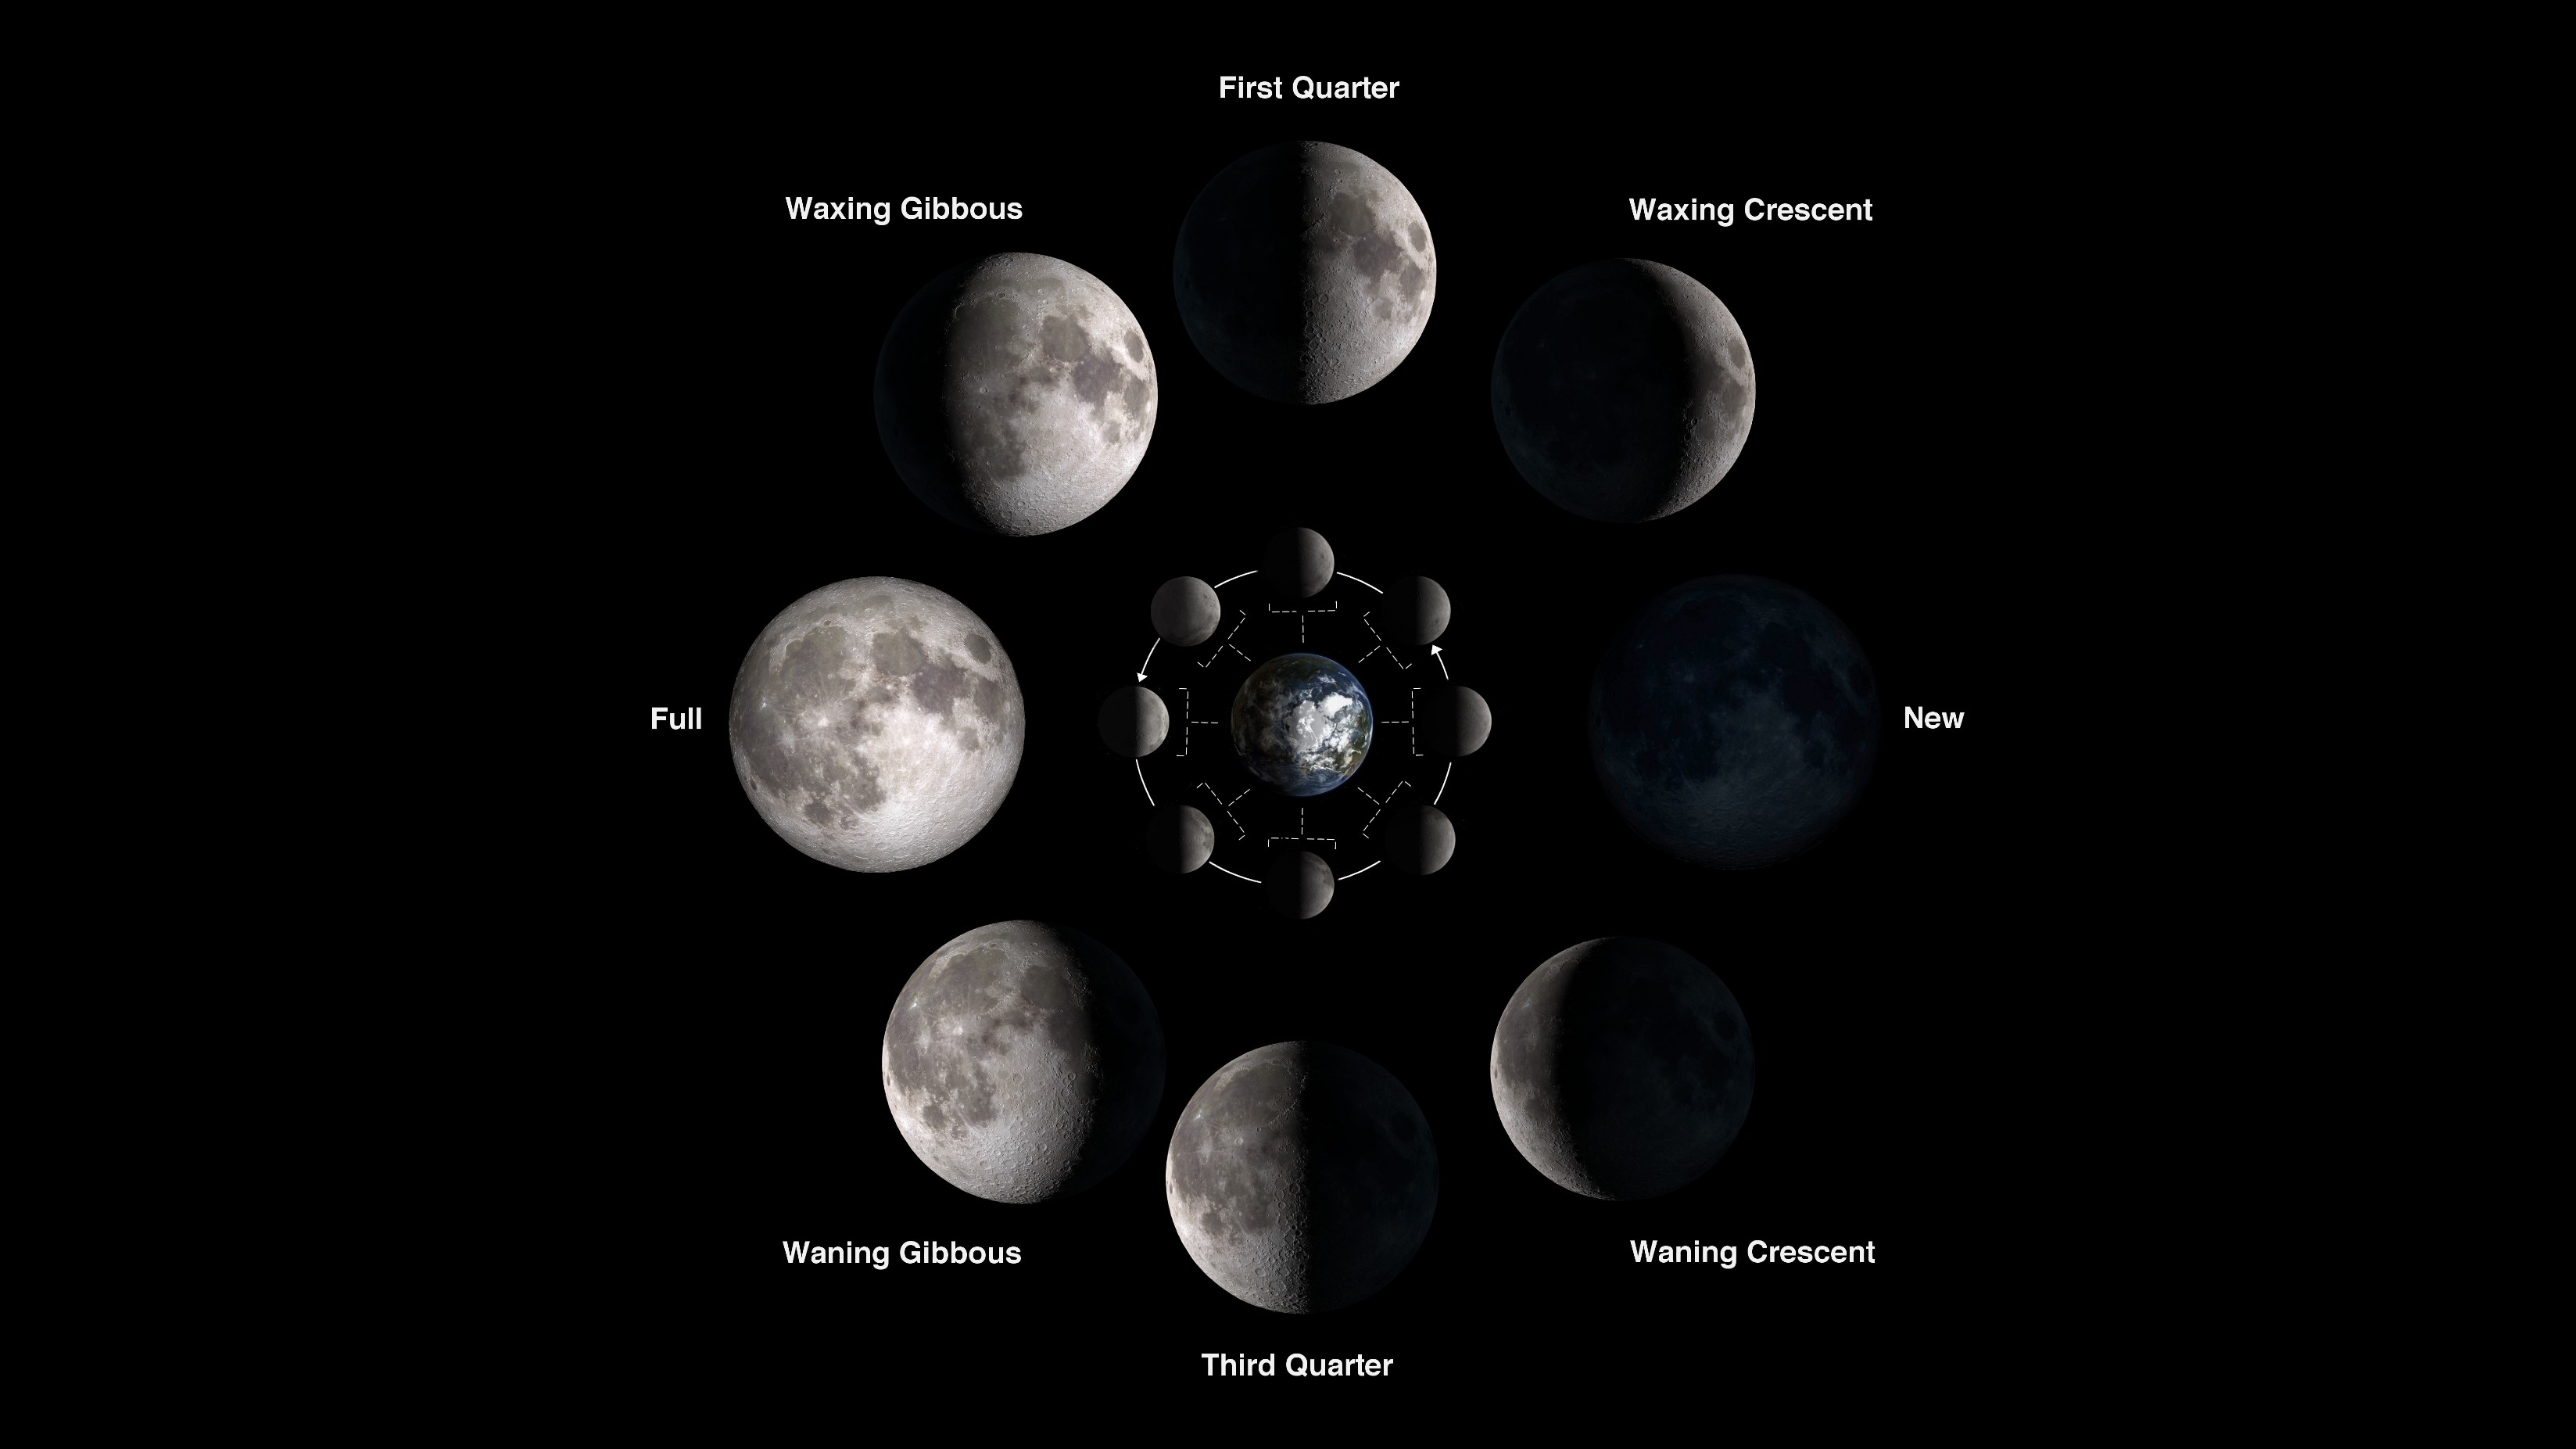 A diagram showing the phases of the moon